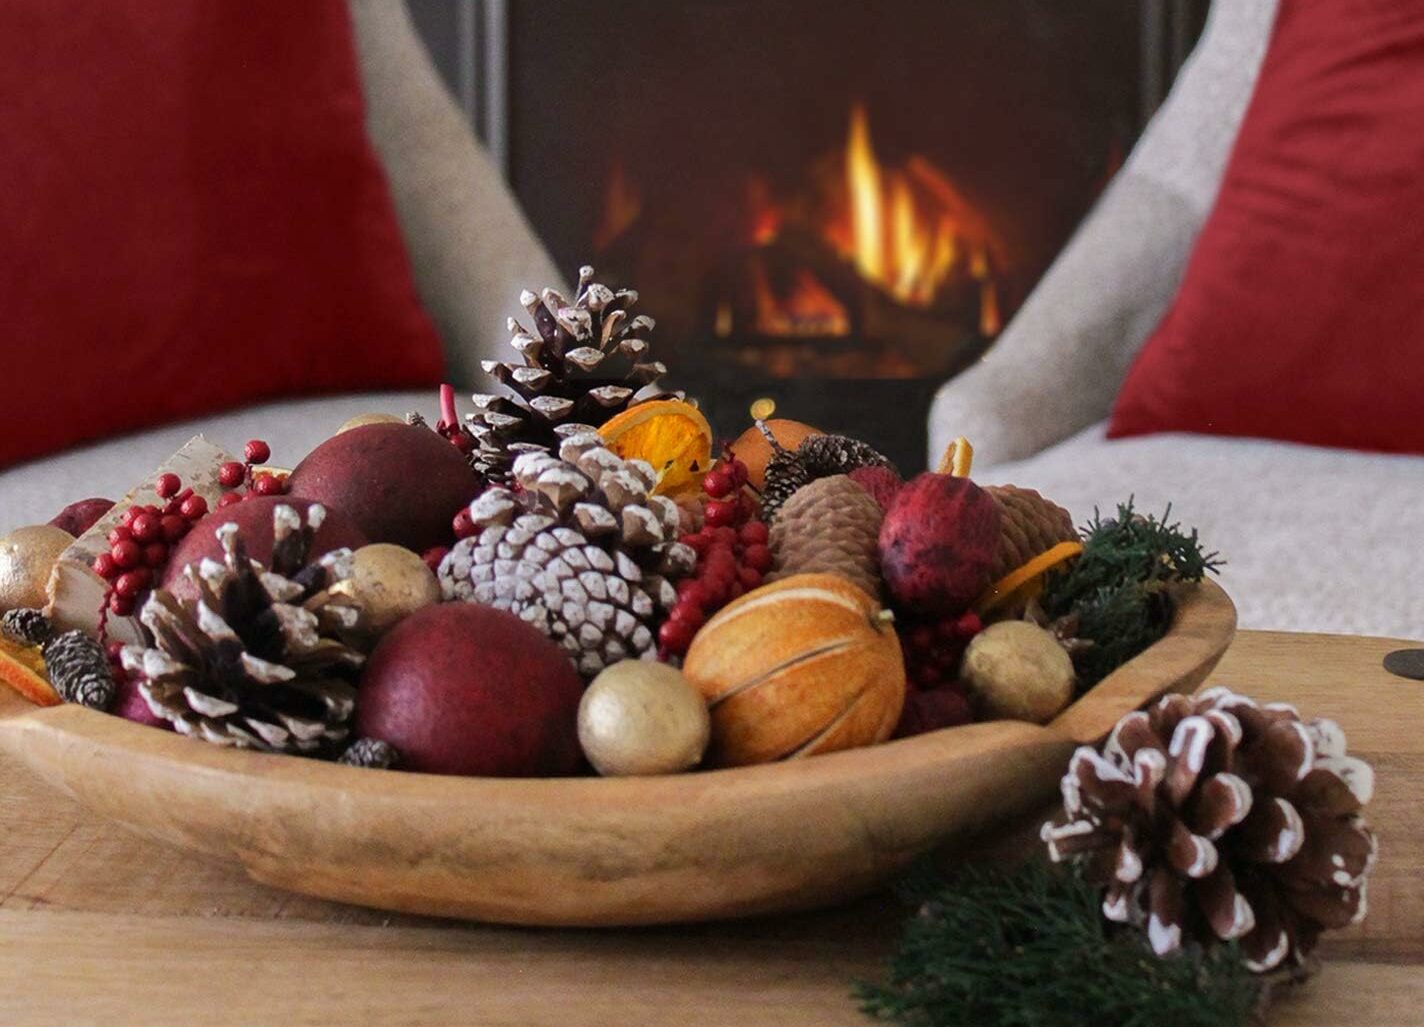 Winter potpourri on table with fireplace in background